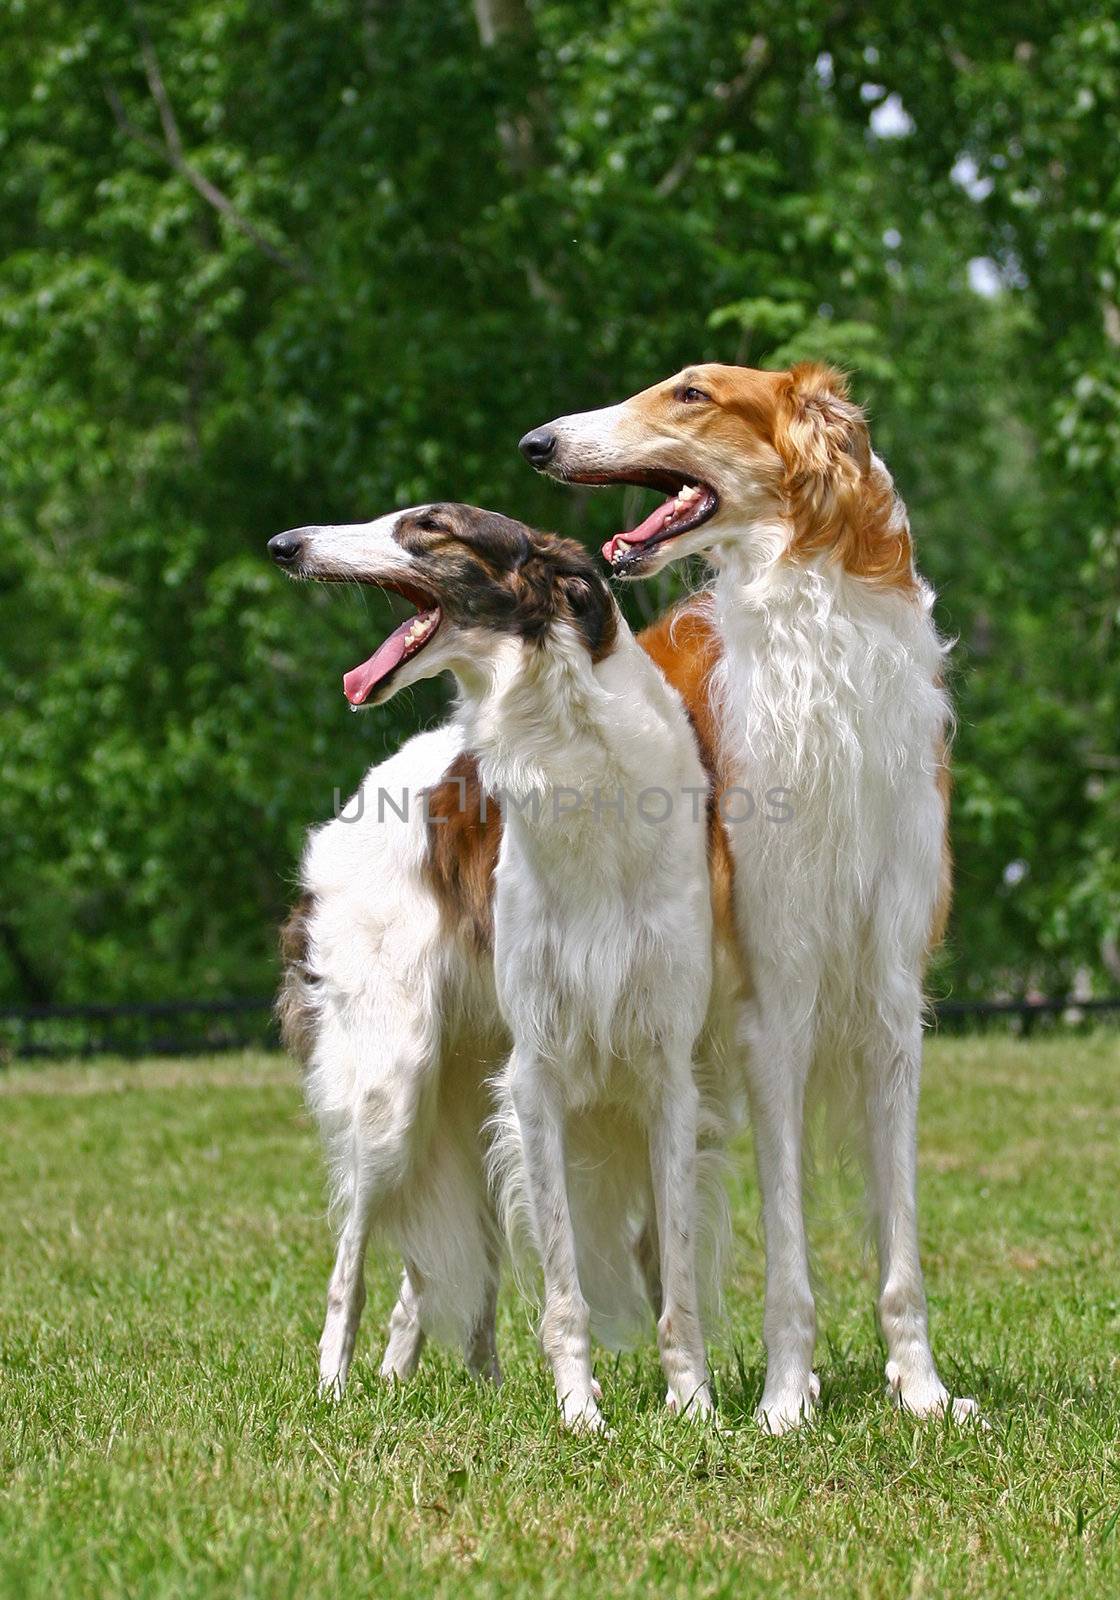 The Borzoi  is a breed of domestic dog (Canis lupus familiaris) also called the Russian Wolfhound and brought to Russia from Middle-Asian countries. Having medium-length and slightly curly hair, it is similar in shape to Greyhounds, and is a member of the sighthound family.